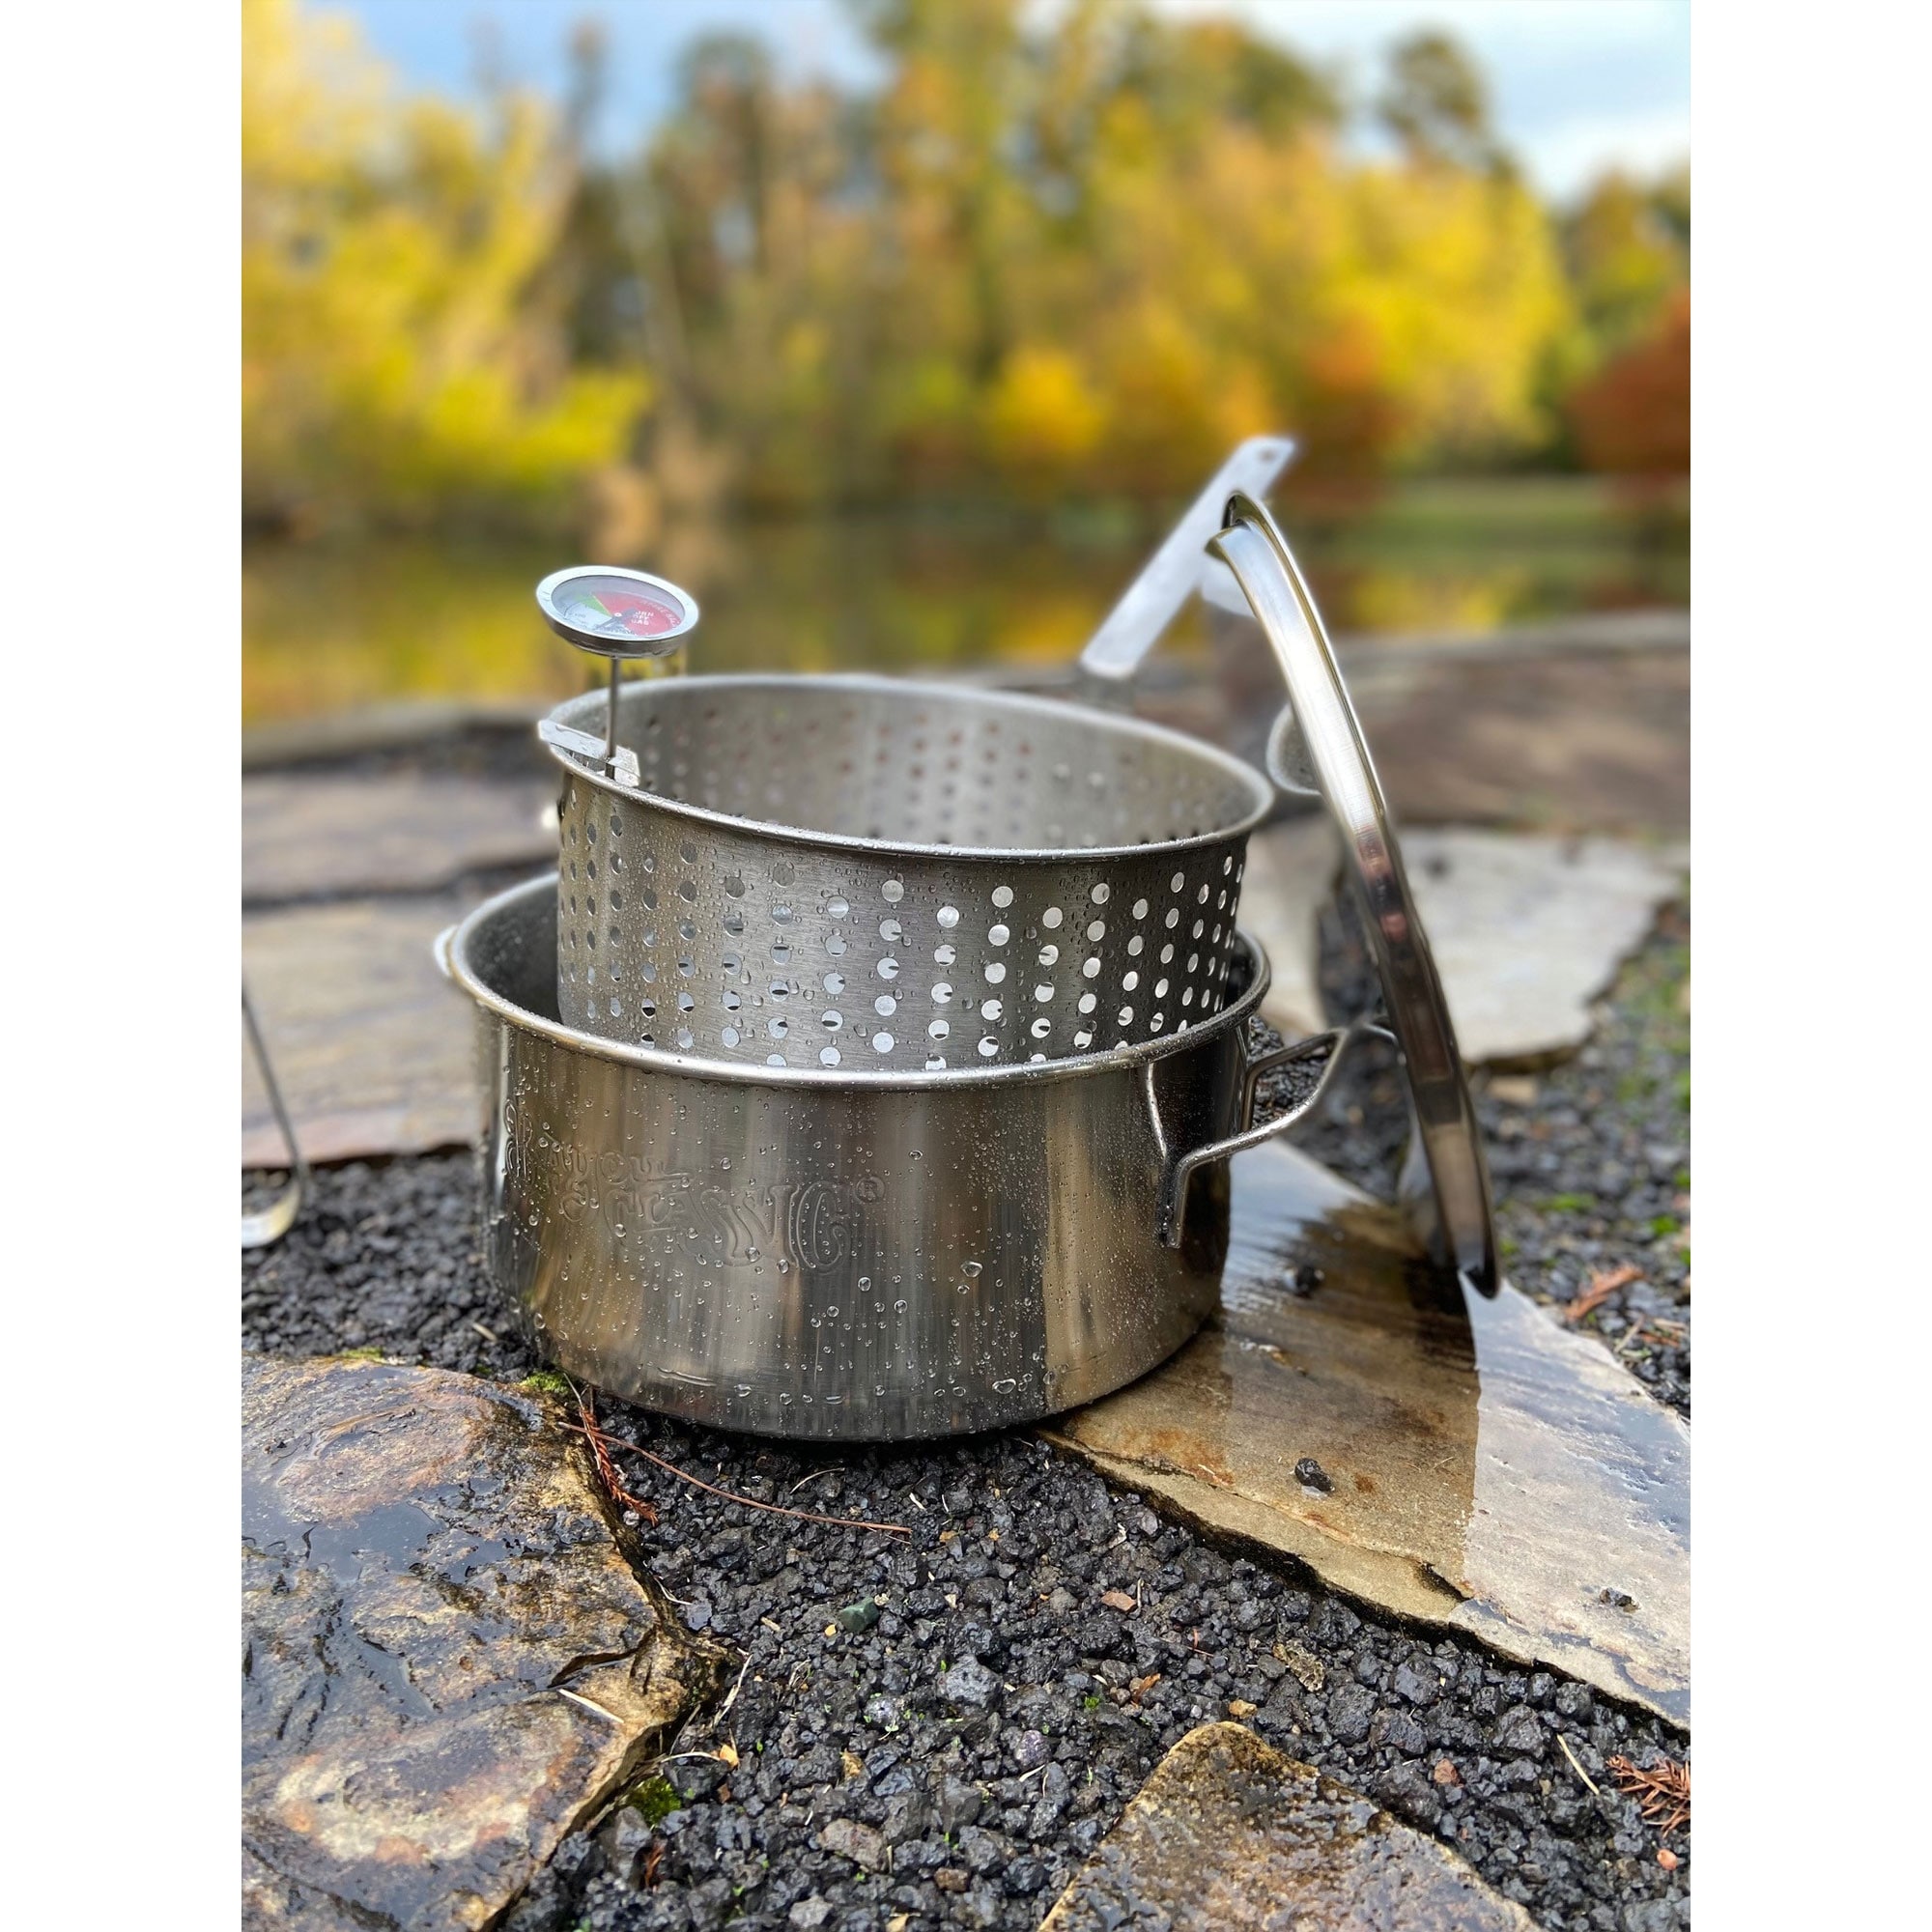 https://ak1.ostkcdn.com/images/products/is/images/direct/85f852939f0155d84ad6a4123f591b22b6ad3d41/Bayou-Classic-Durable-10-Quart-Stainless-Steel-Fry-Pot-and-Perforated-Basket.jpg